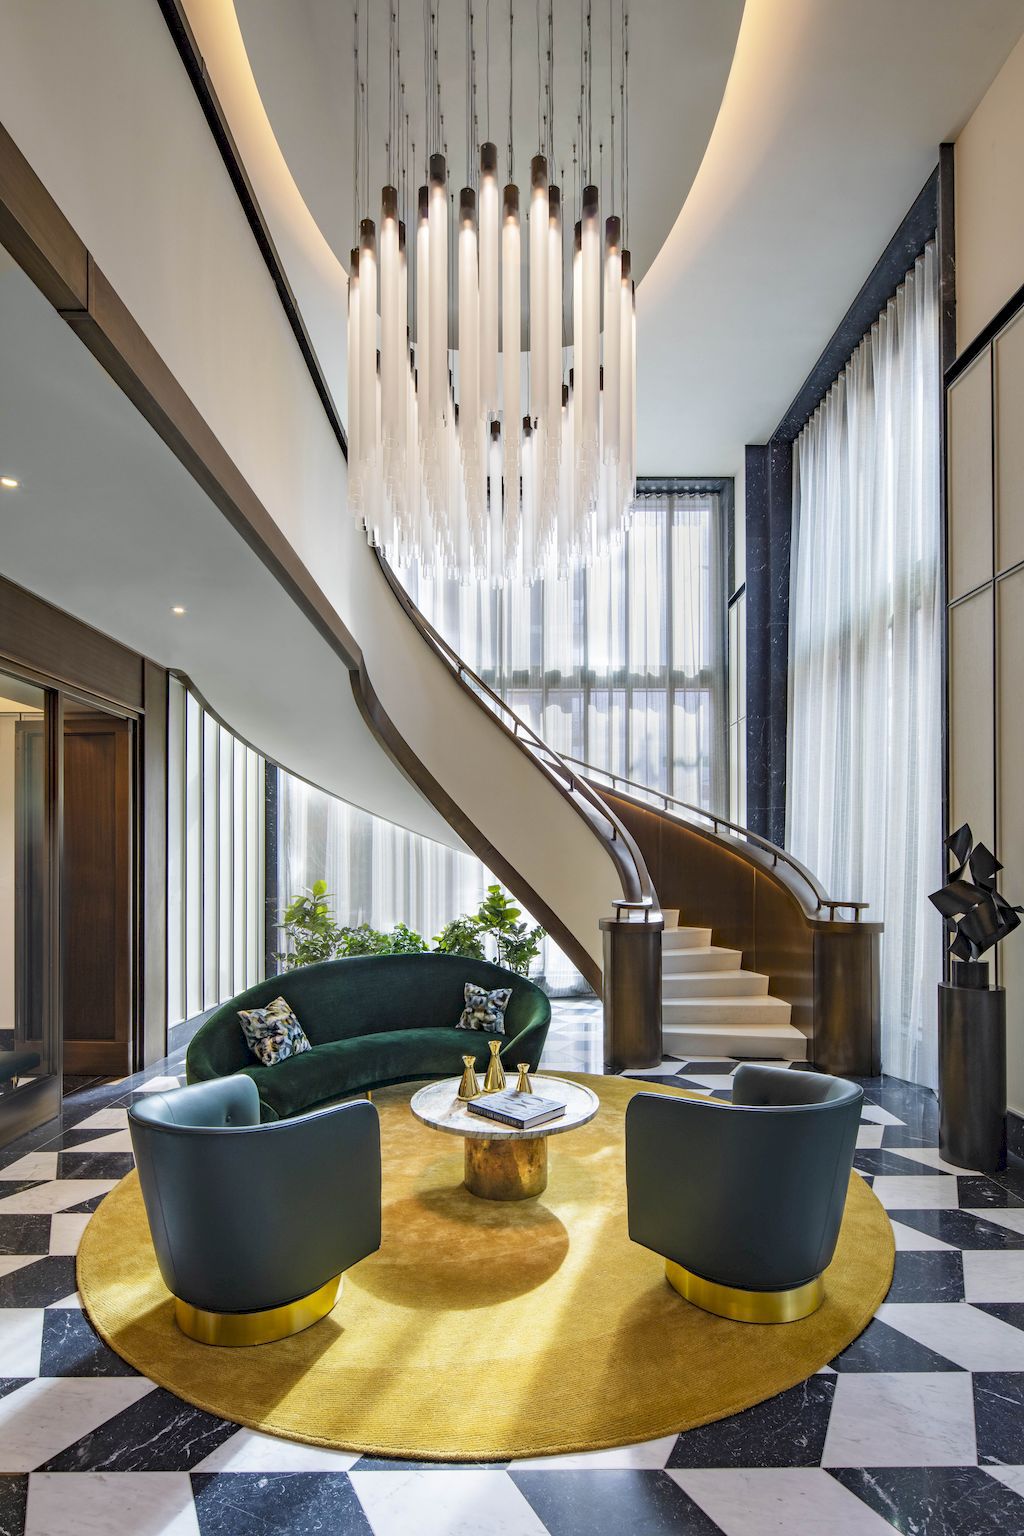 40 East End Boutique Condo, Stunning high end luxury project in New York